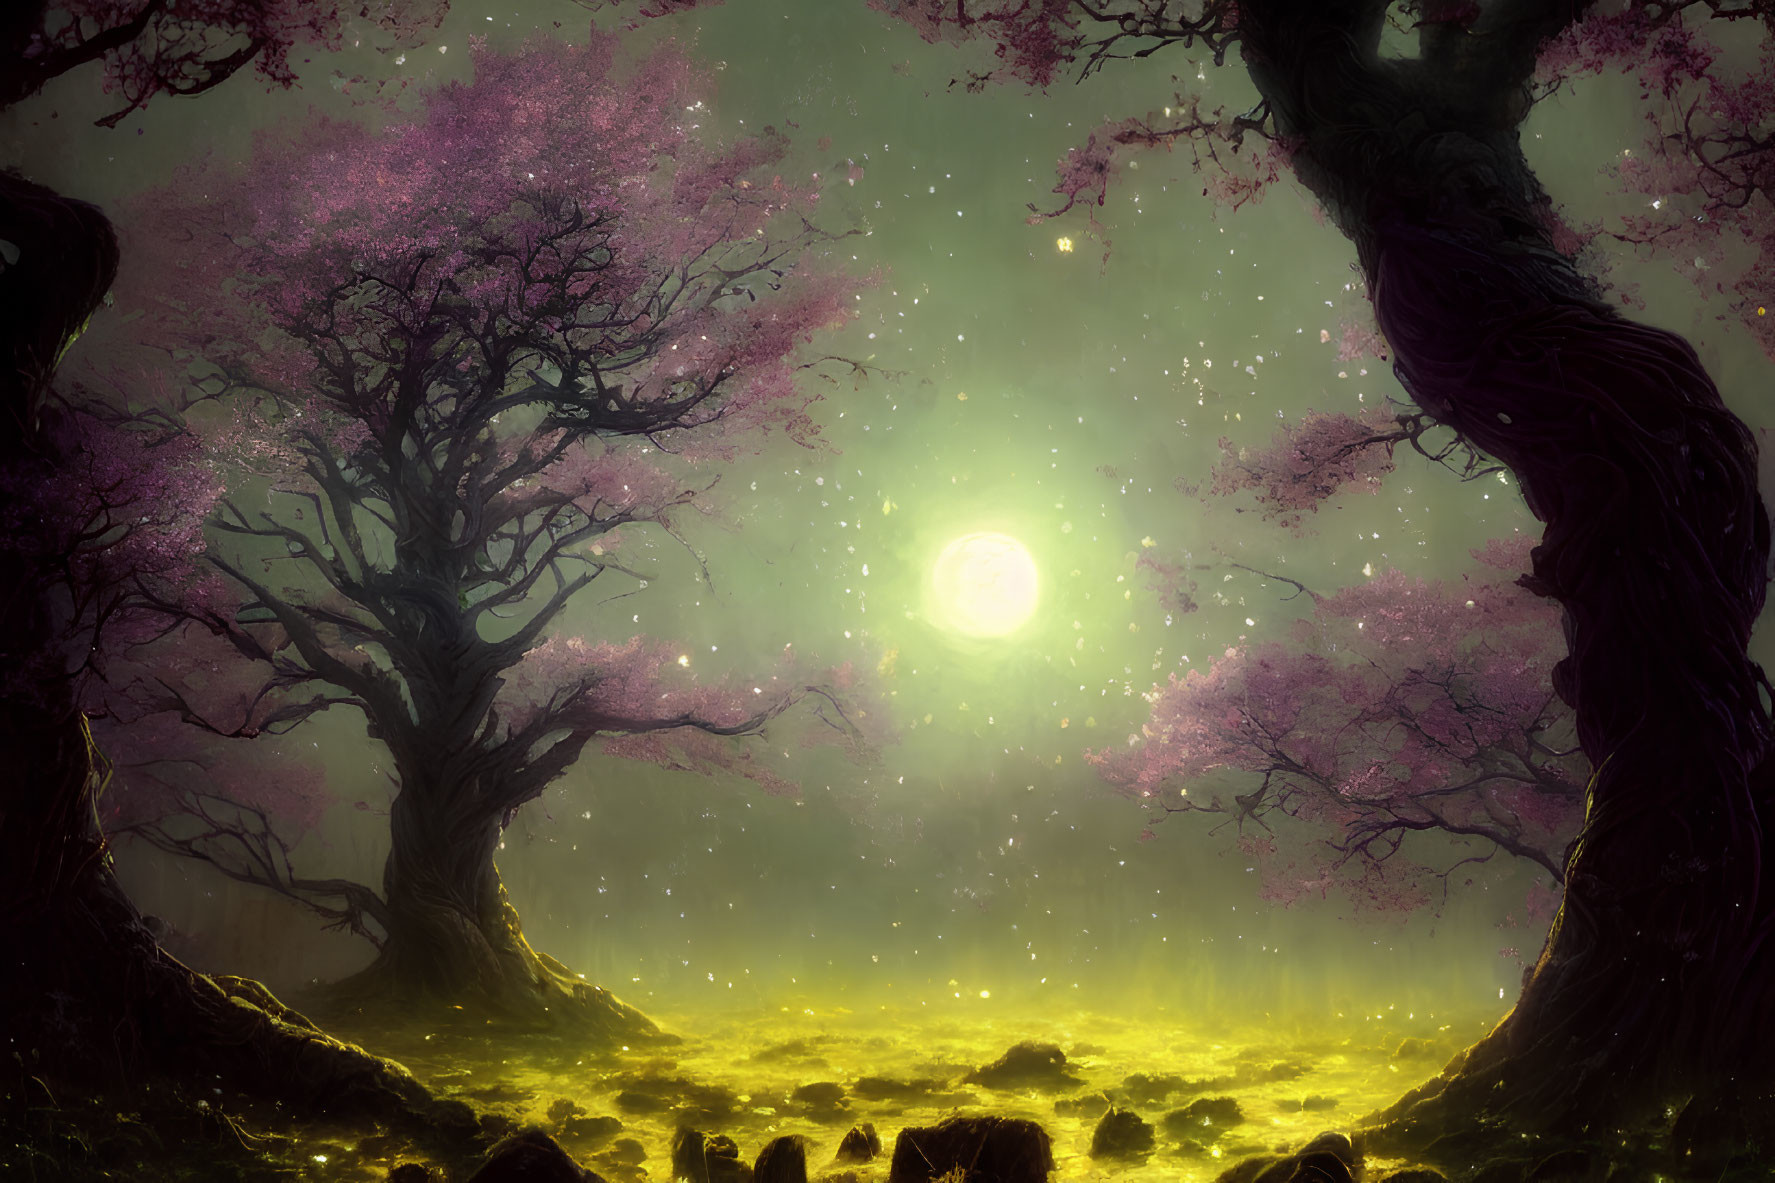 Ancient trees with pink blossoms in mystical yellow meadow under star-filled sky